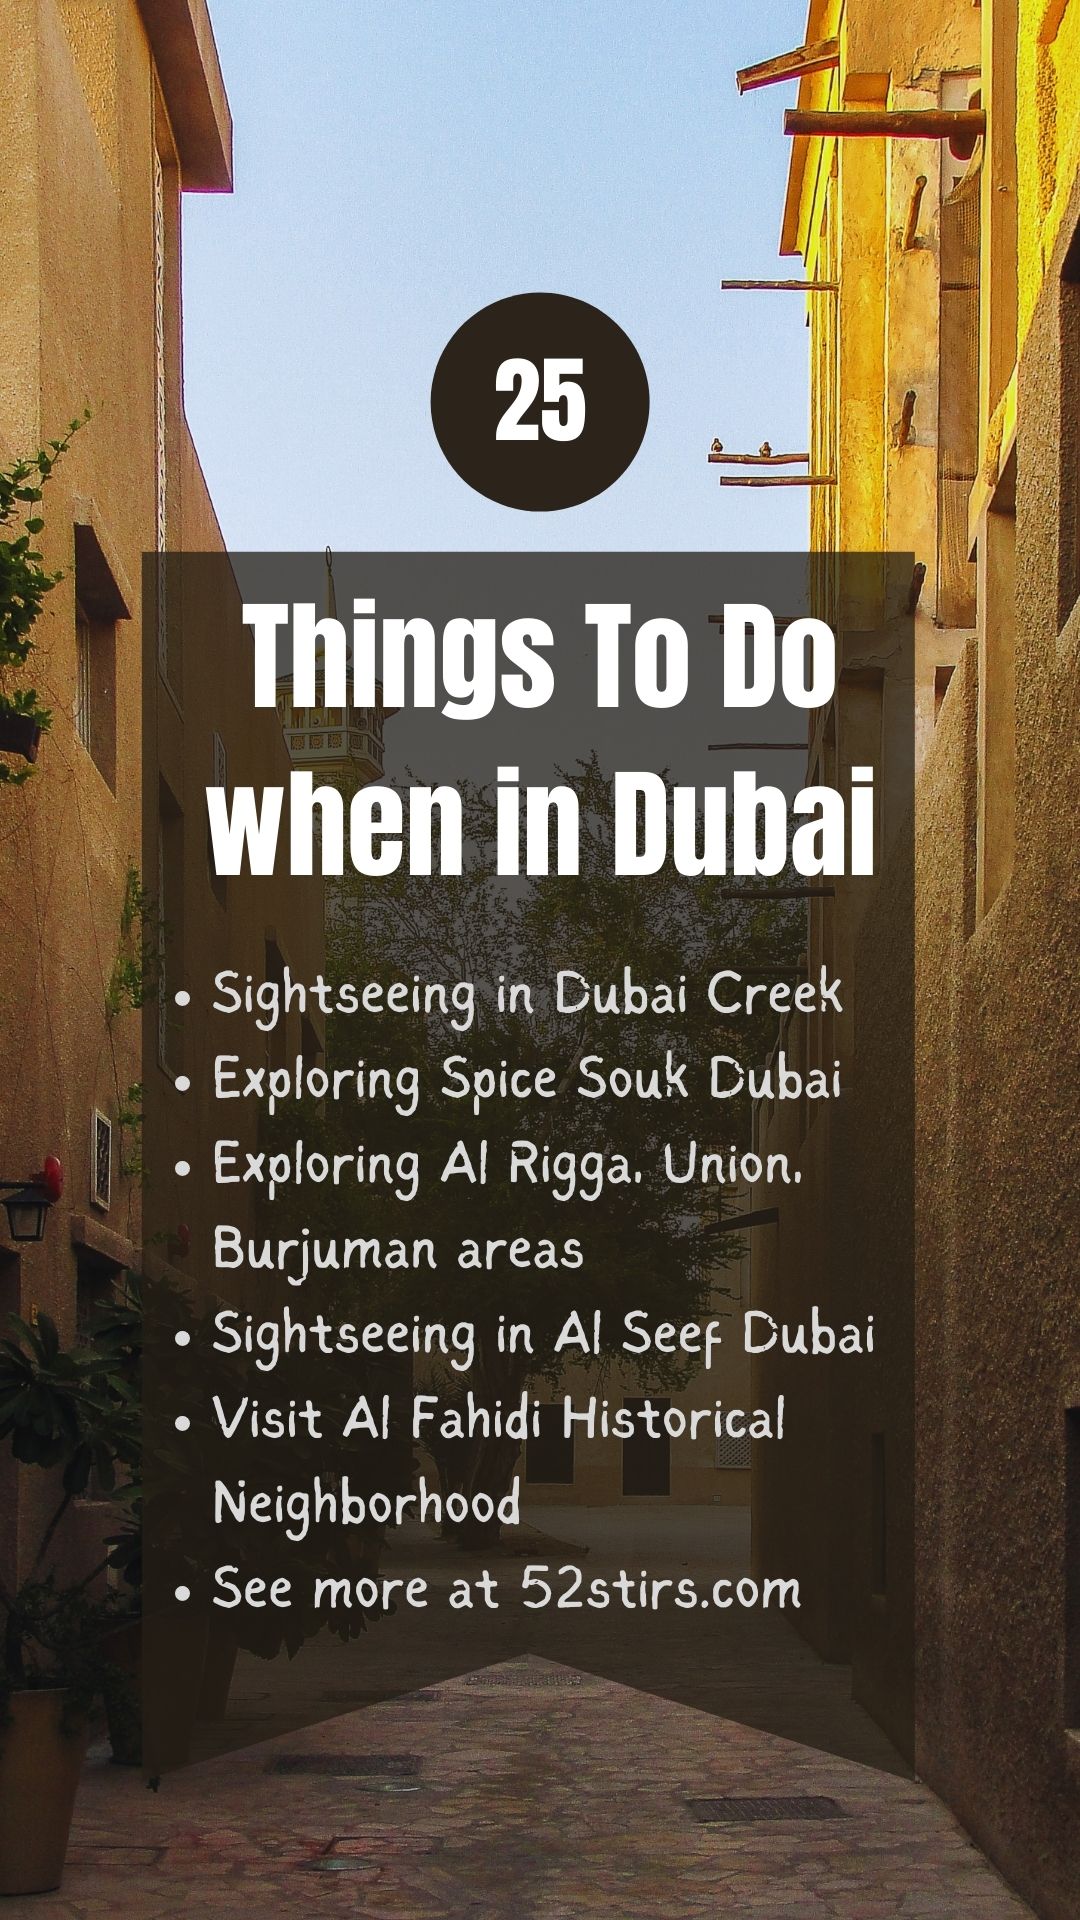 25 Ultimate Free Things to Do when in Dubai - 52stirs.com